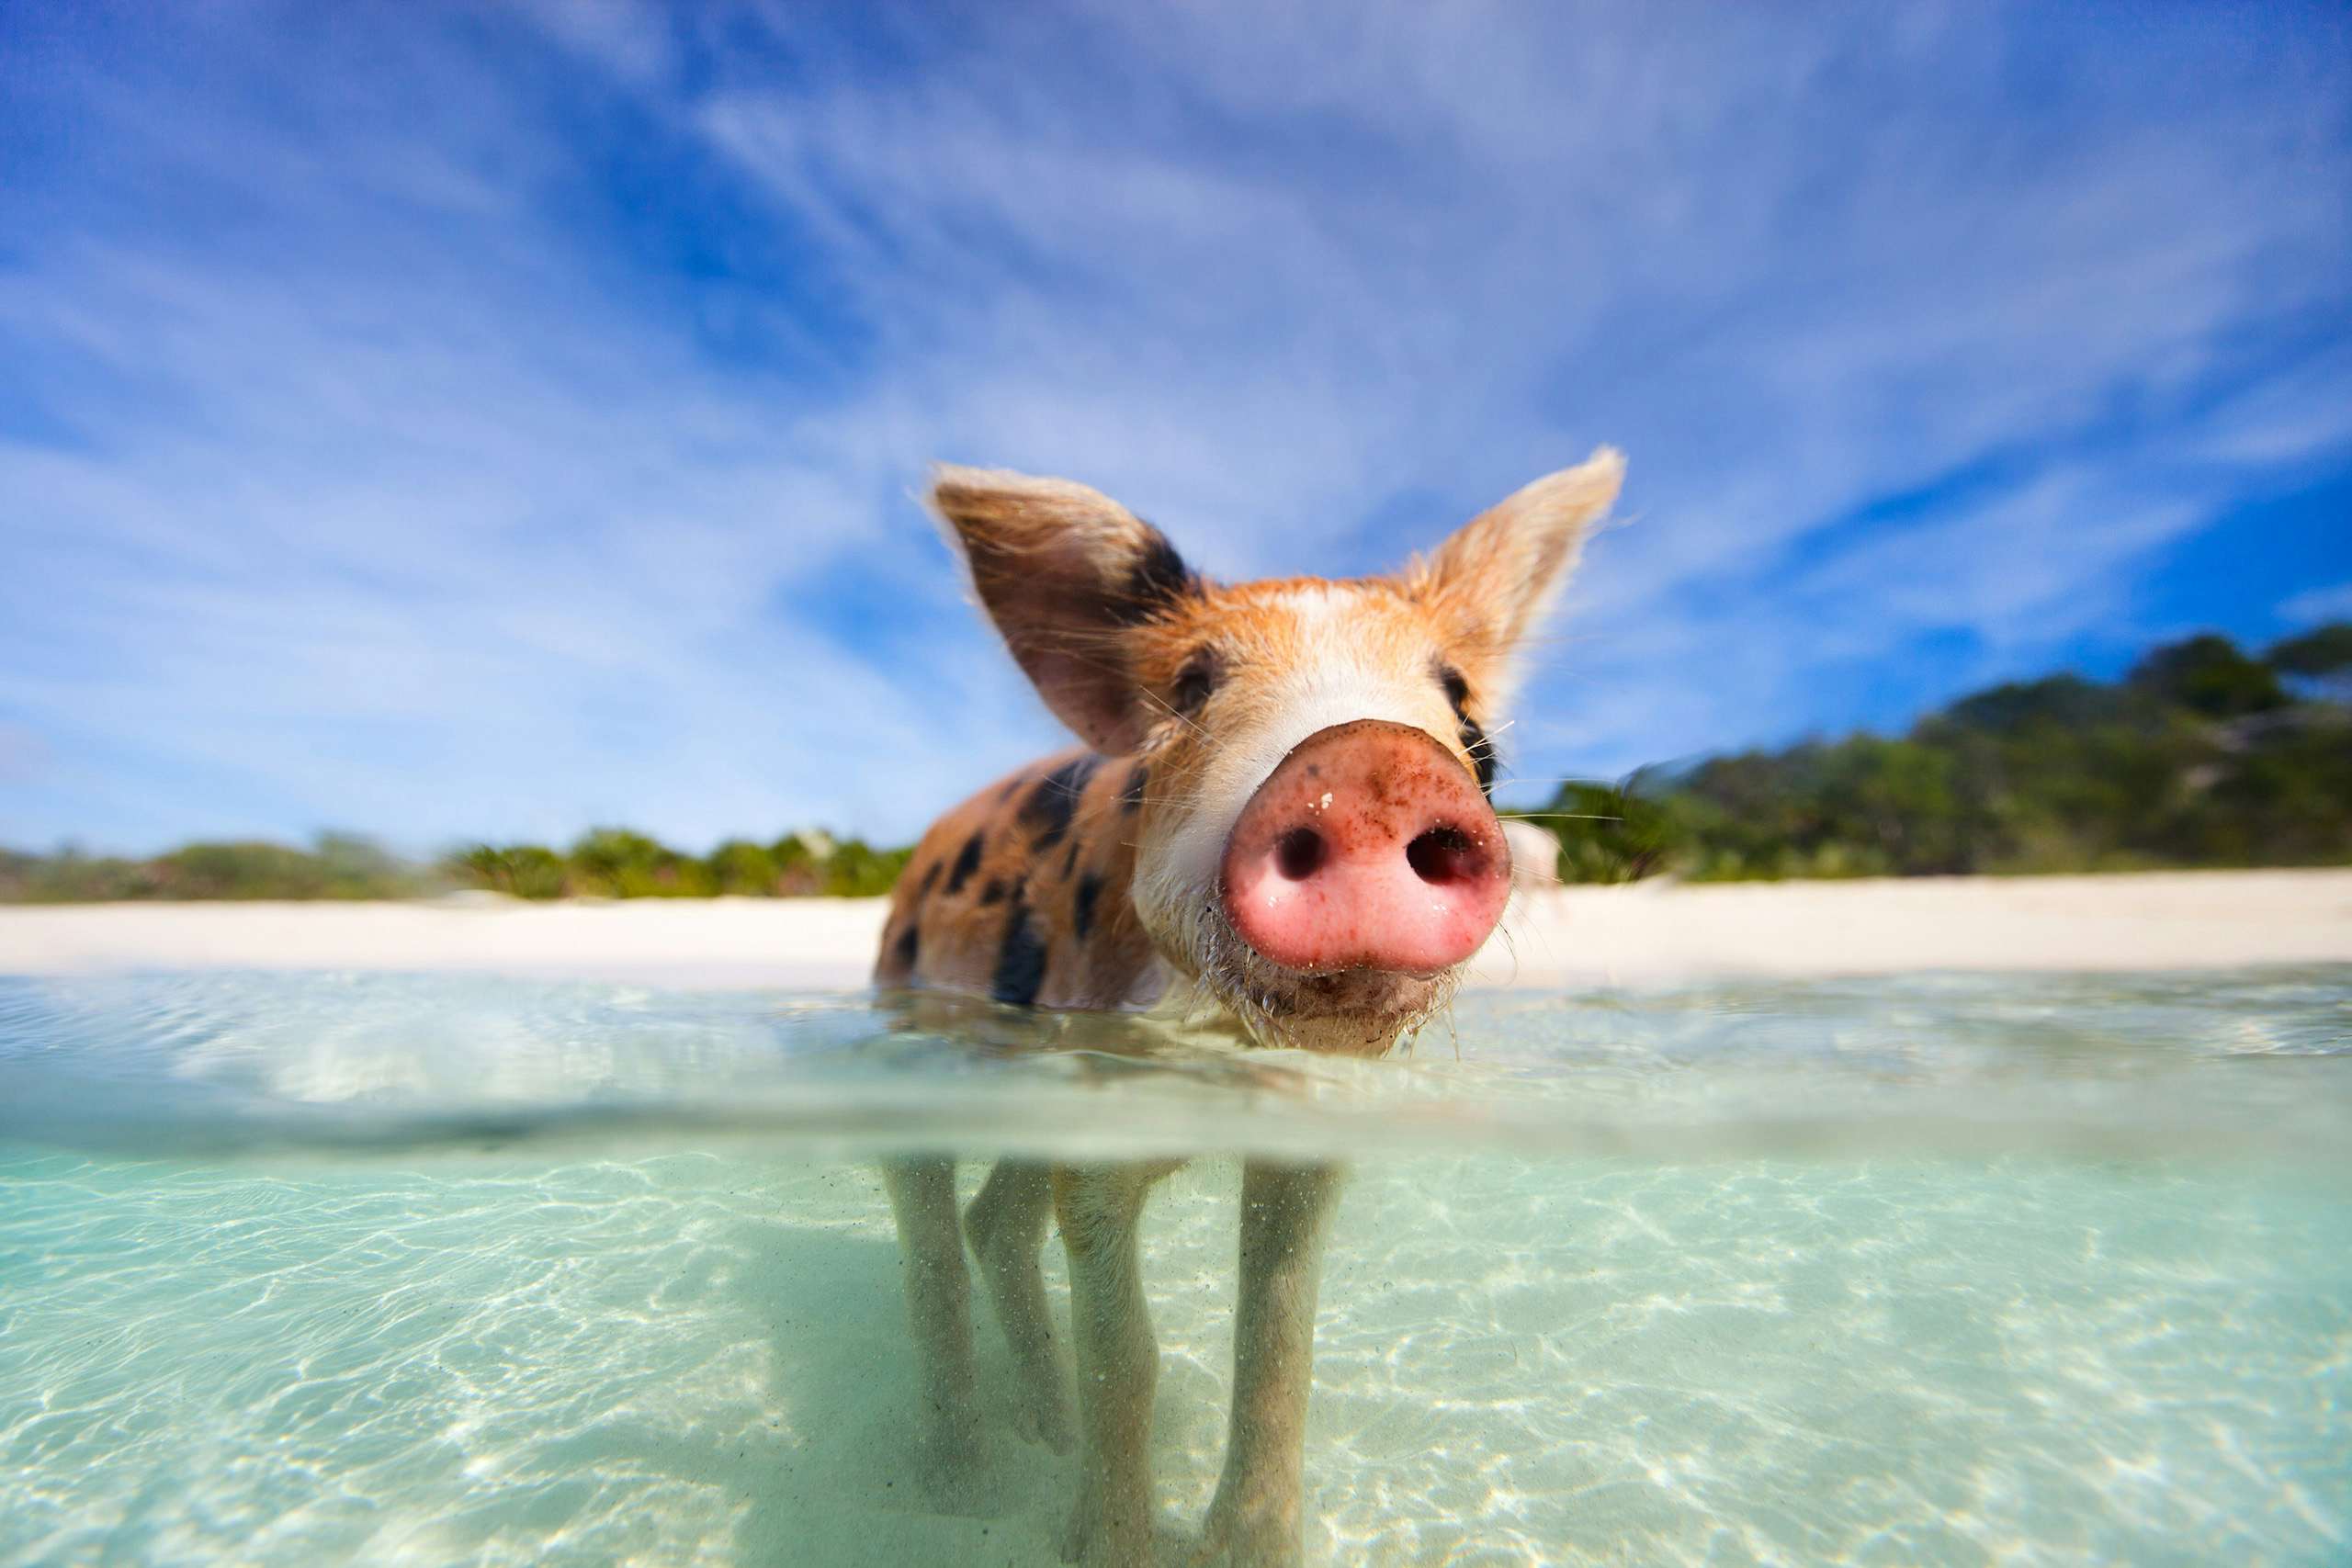 A playful swimming pig captured in the crystal-clear waters of the Exumas, Bahamas—a delightful encounter on your Bahamas Yacht Charter.